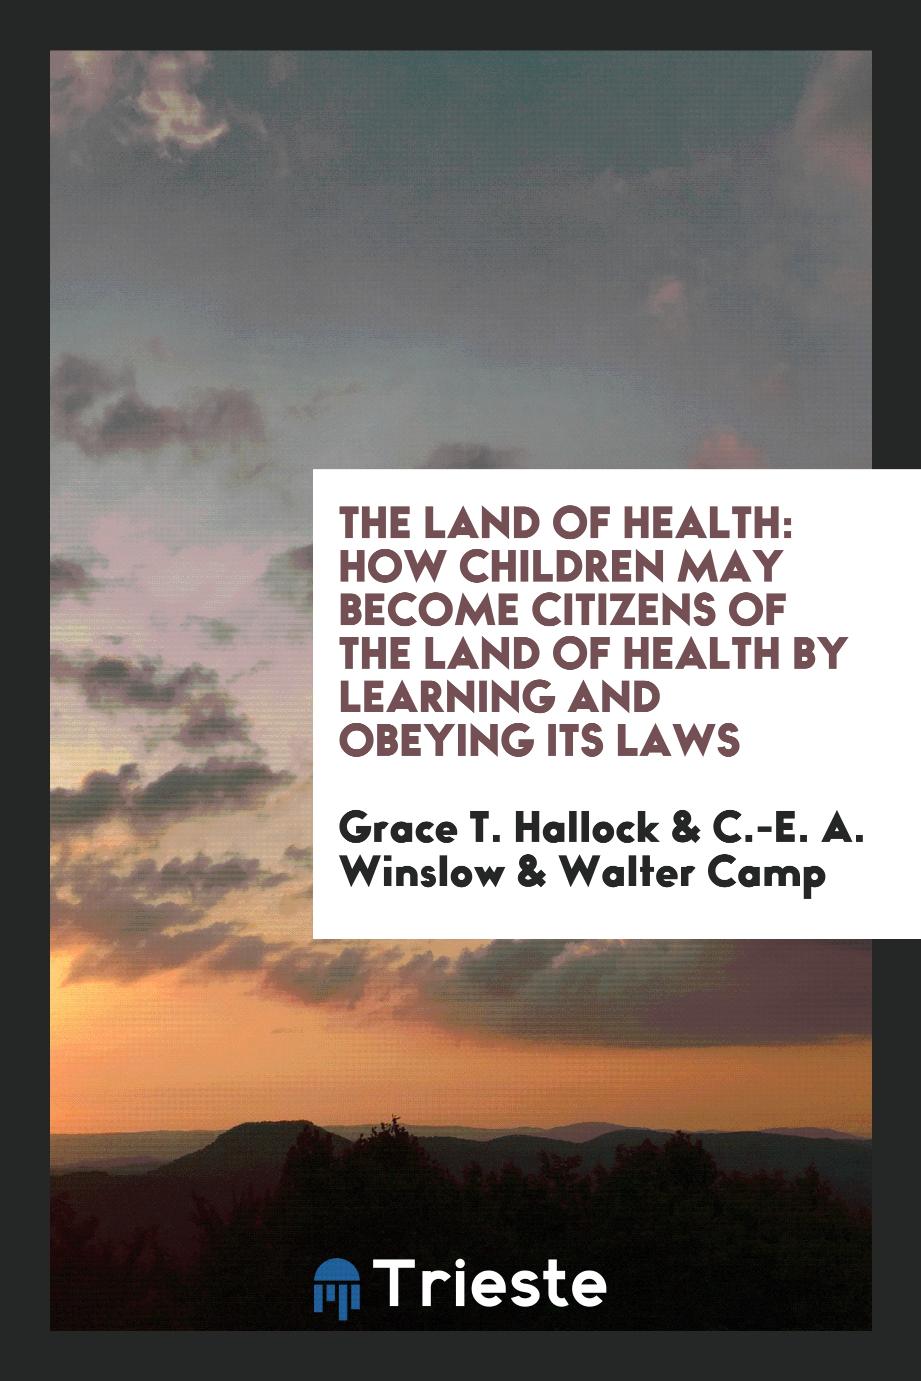 The Land of Health: How Children May Become Citizens of the Land of Health by Learning and Obeying Its Laws